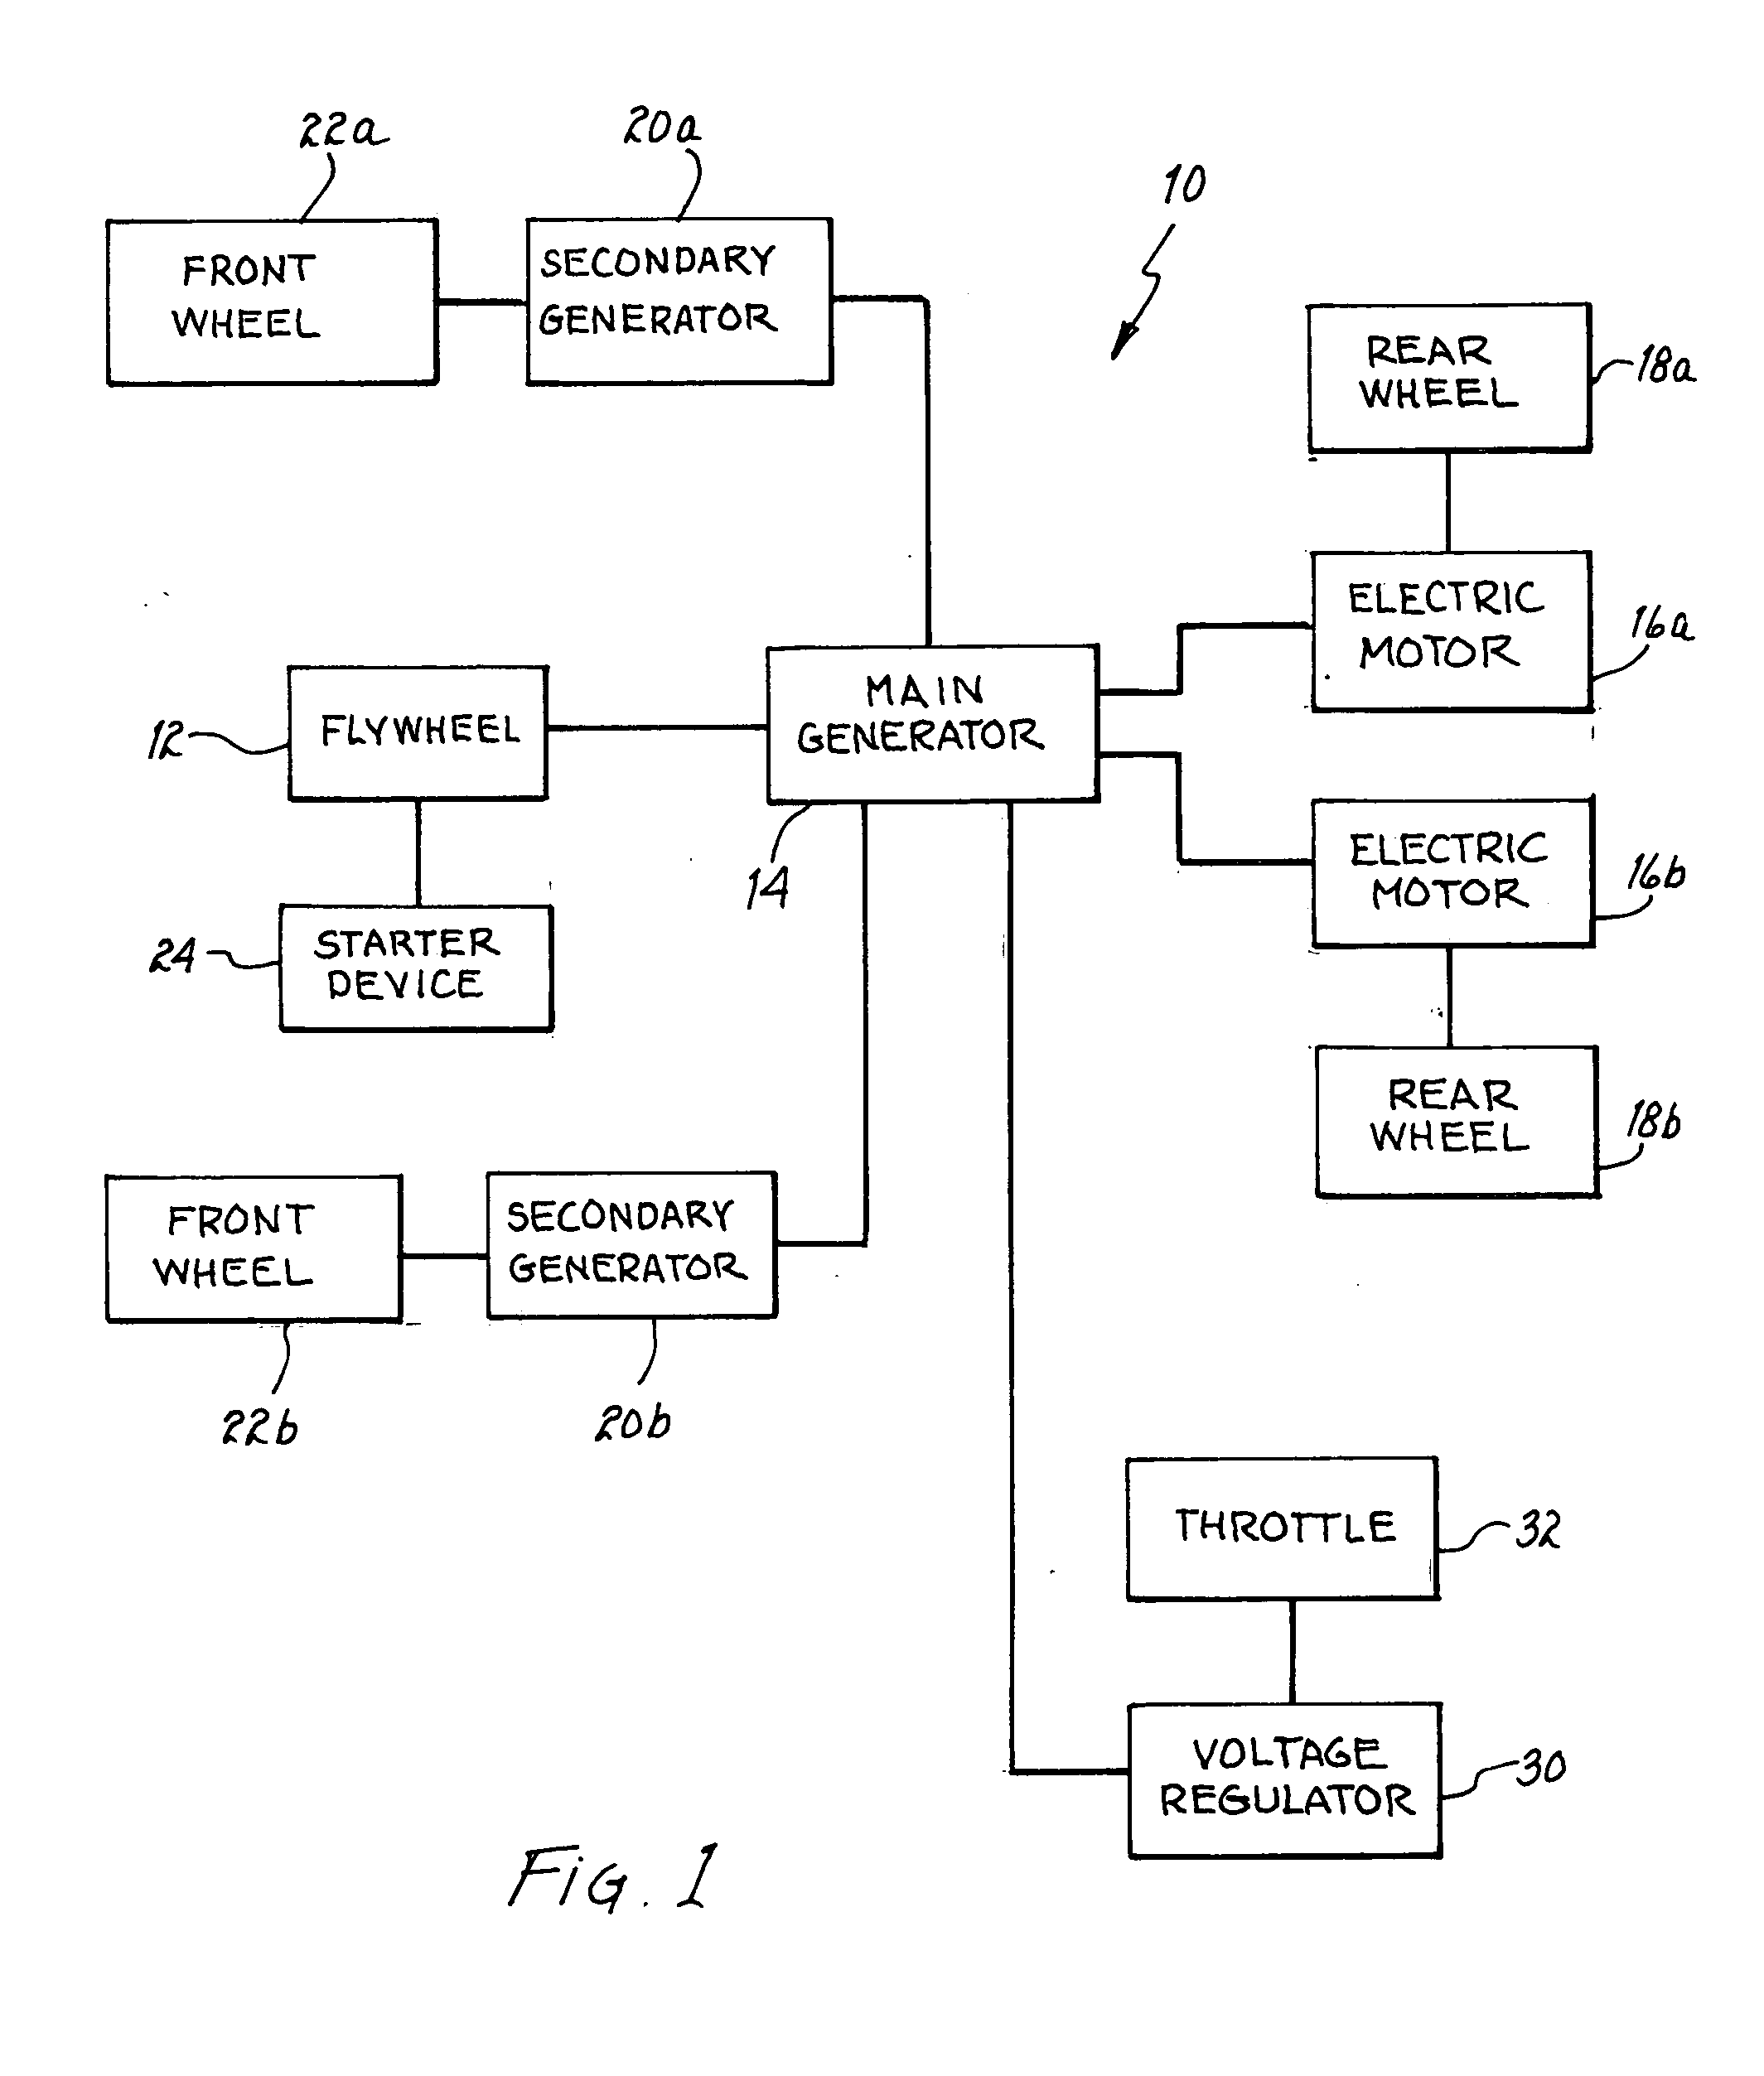 Flywheel drive system for a motor vehicle and method therefor